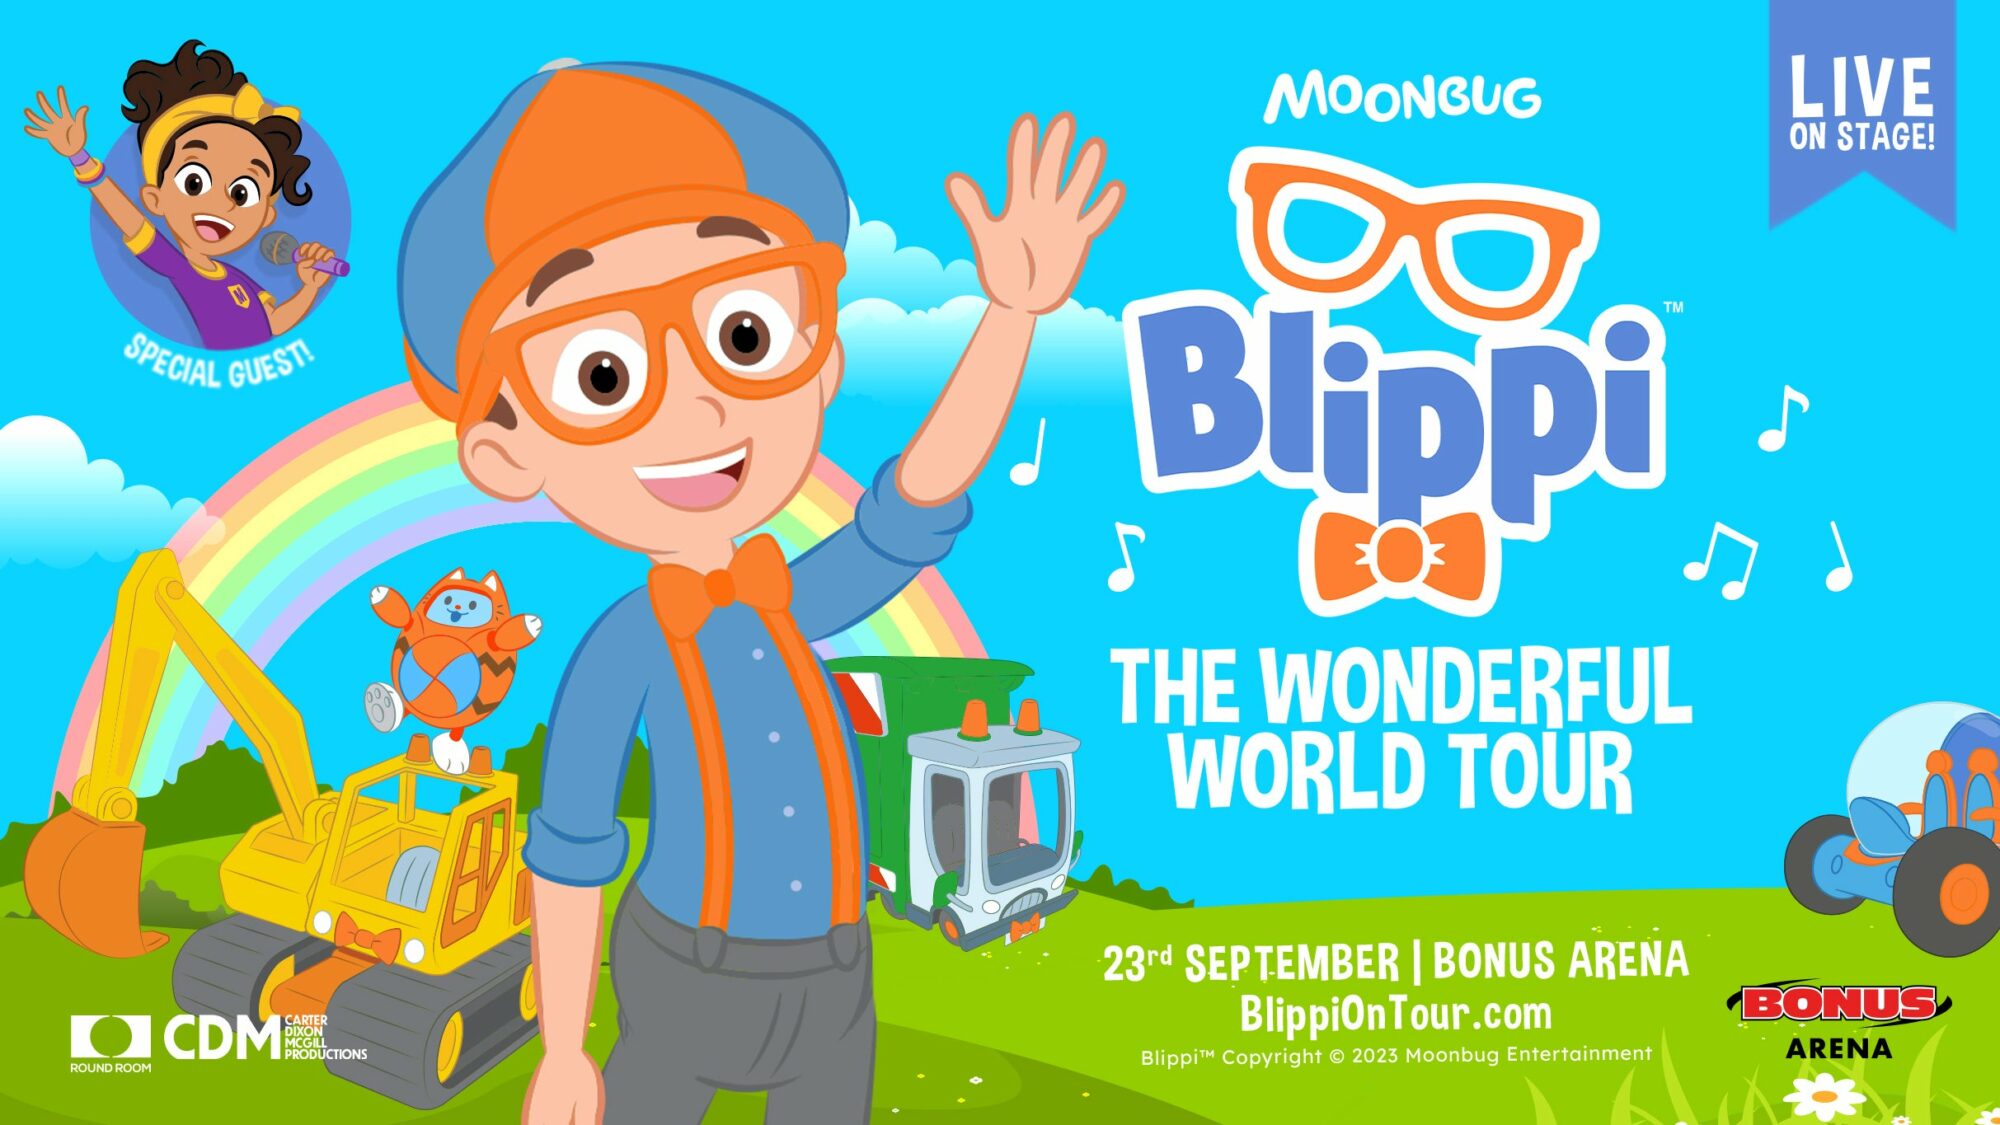 Image name Blippi The Wonderful World Tour at Bonus Arena Hull Hull the 35 image from the post Blippi - The Wonderful World Tour at Connexin Live, Hull in Yorkshire.com.